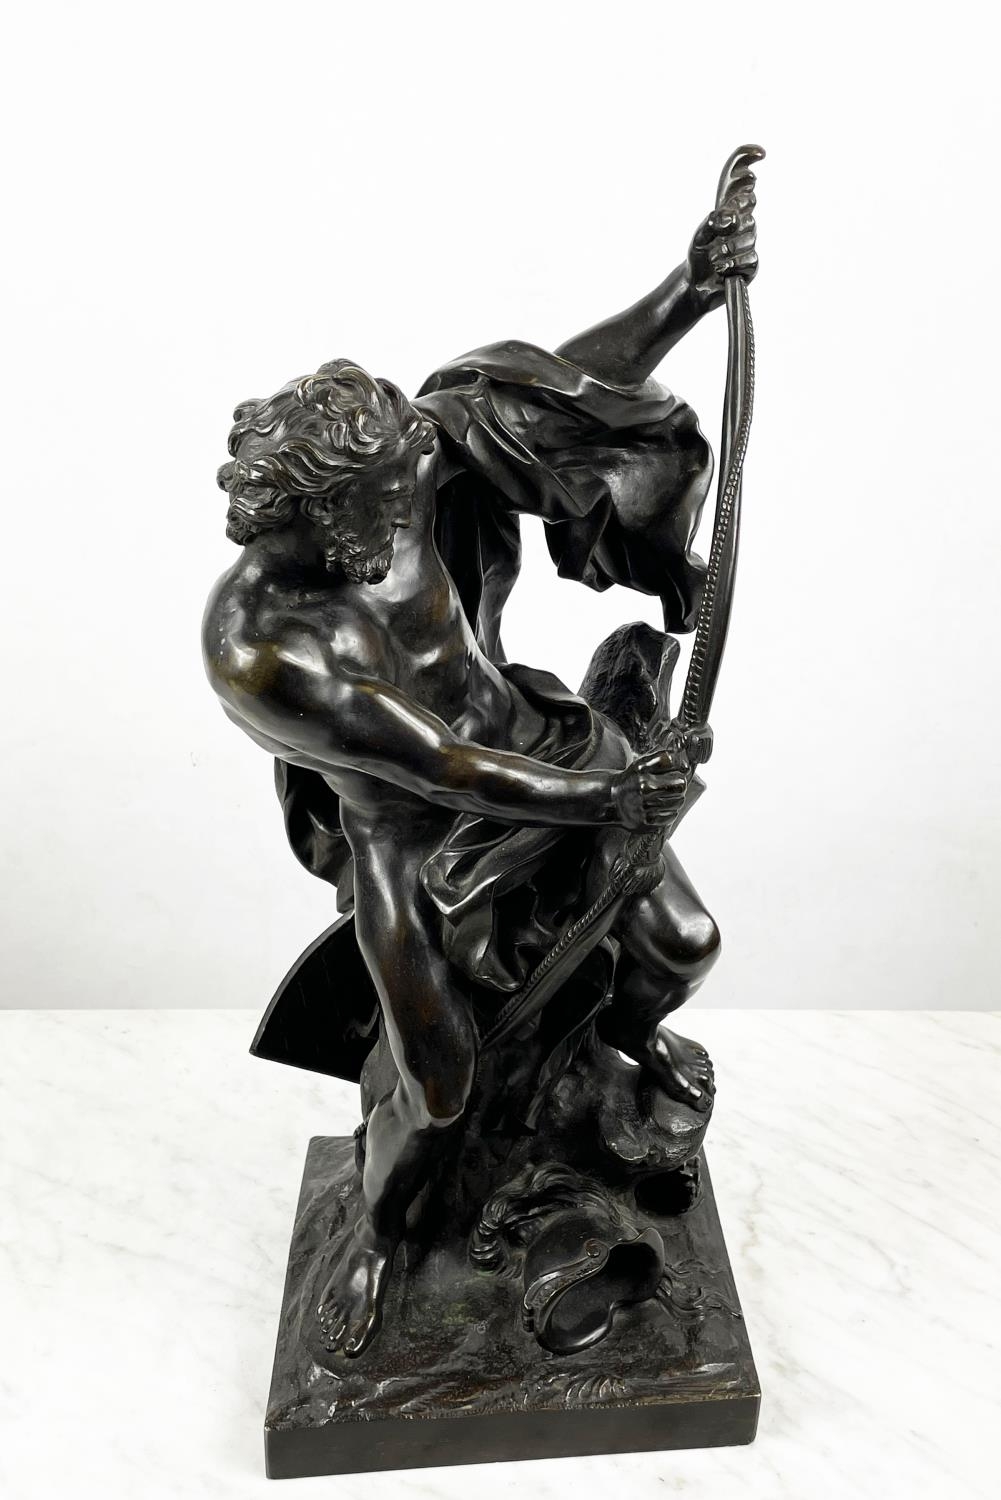 JACQUES BOUSSEAU, French (1681-1740) Ulysse stringing his bow, late 19th century bronze, 48cm H. - Image 2 of 6